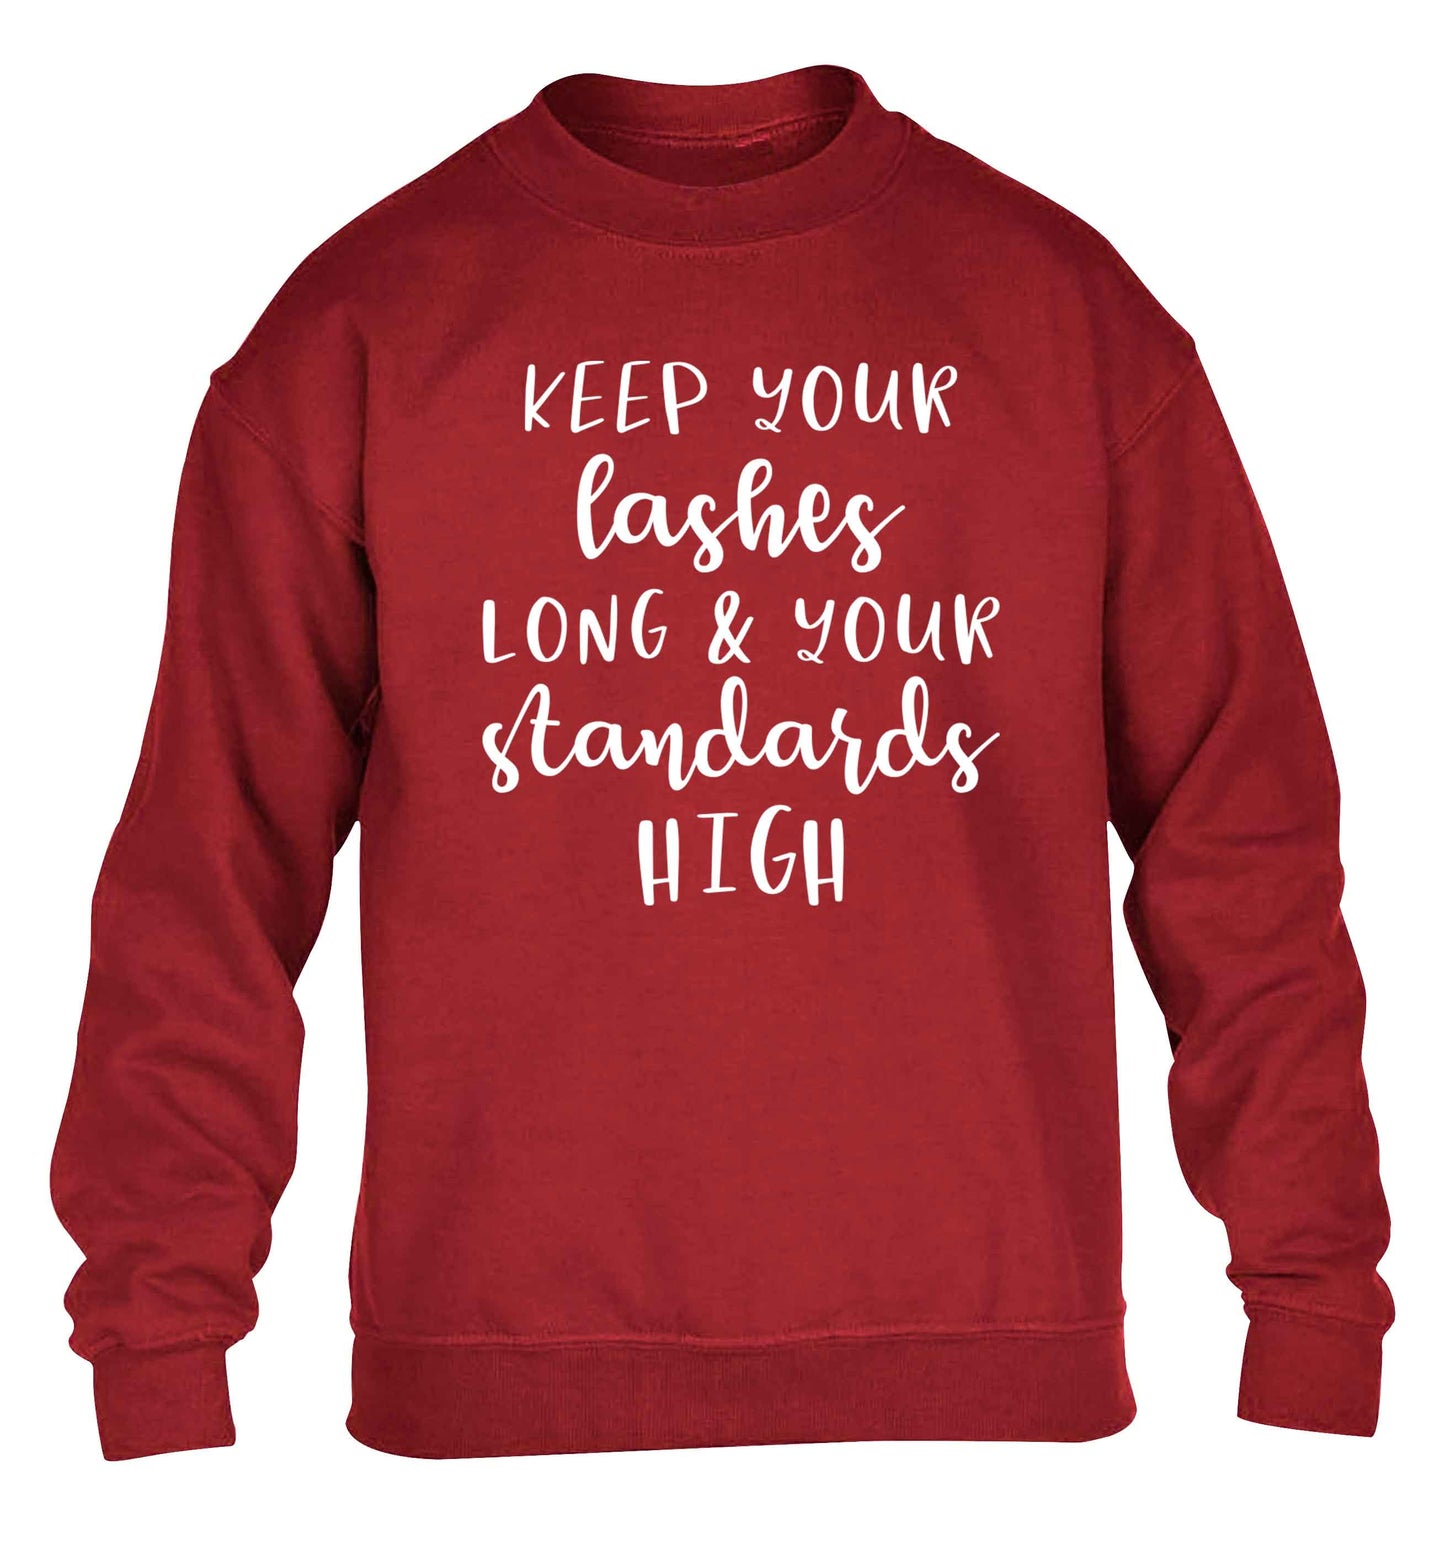 Keep your lashes long and your standards high children's grey sweater 12-13 Years